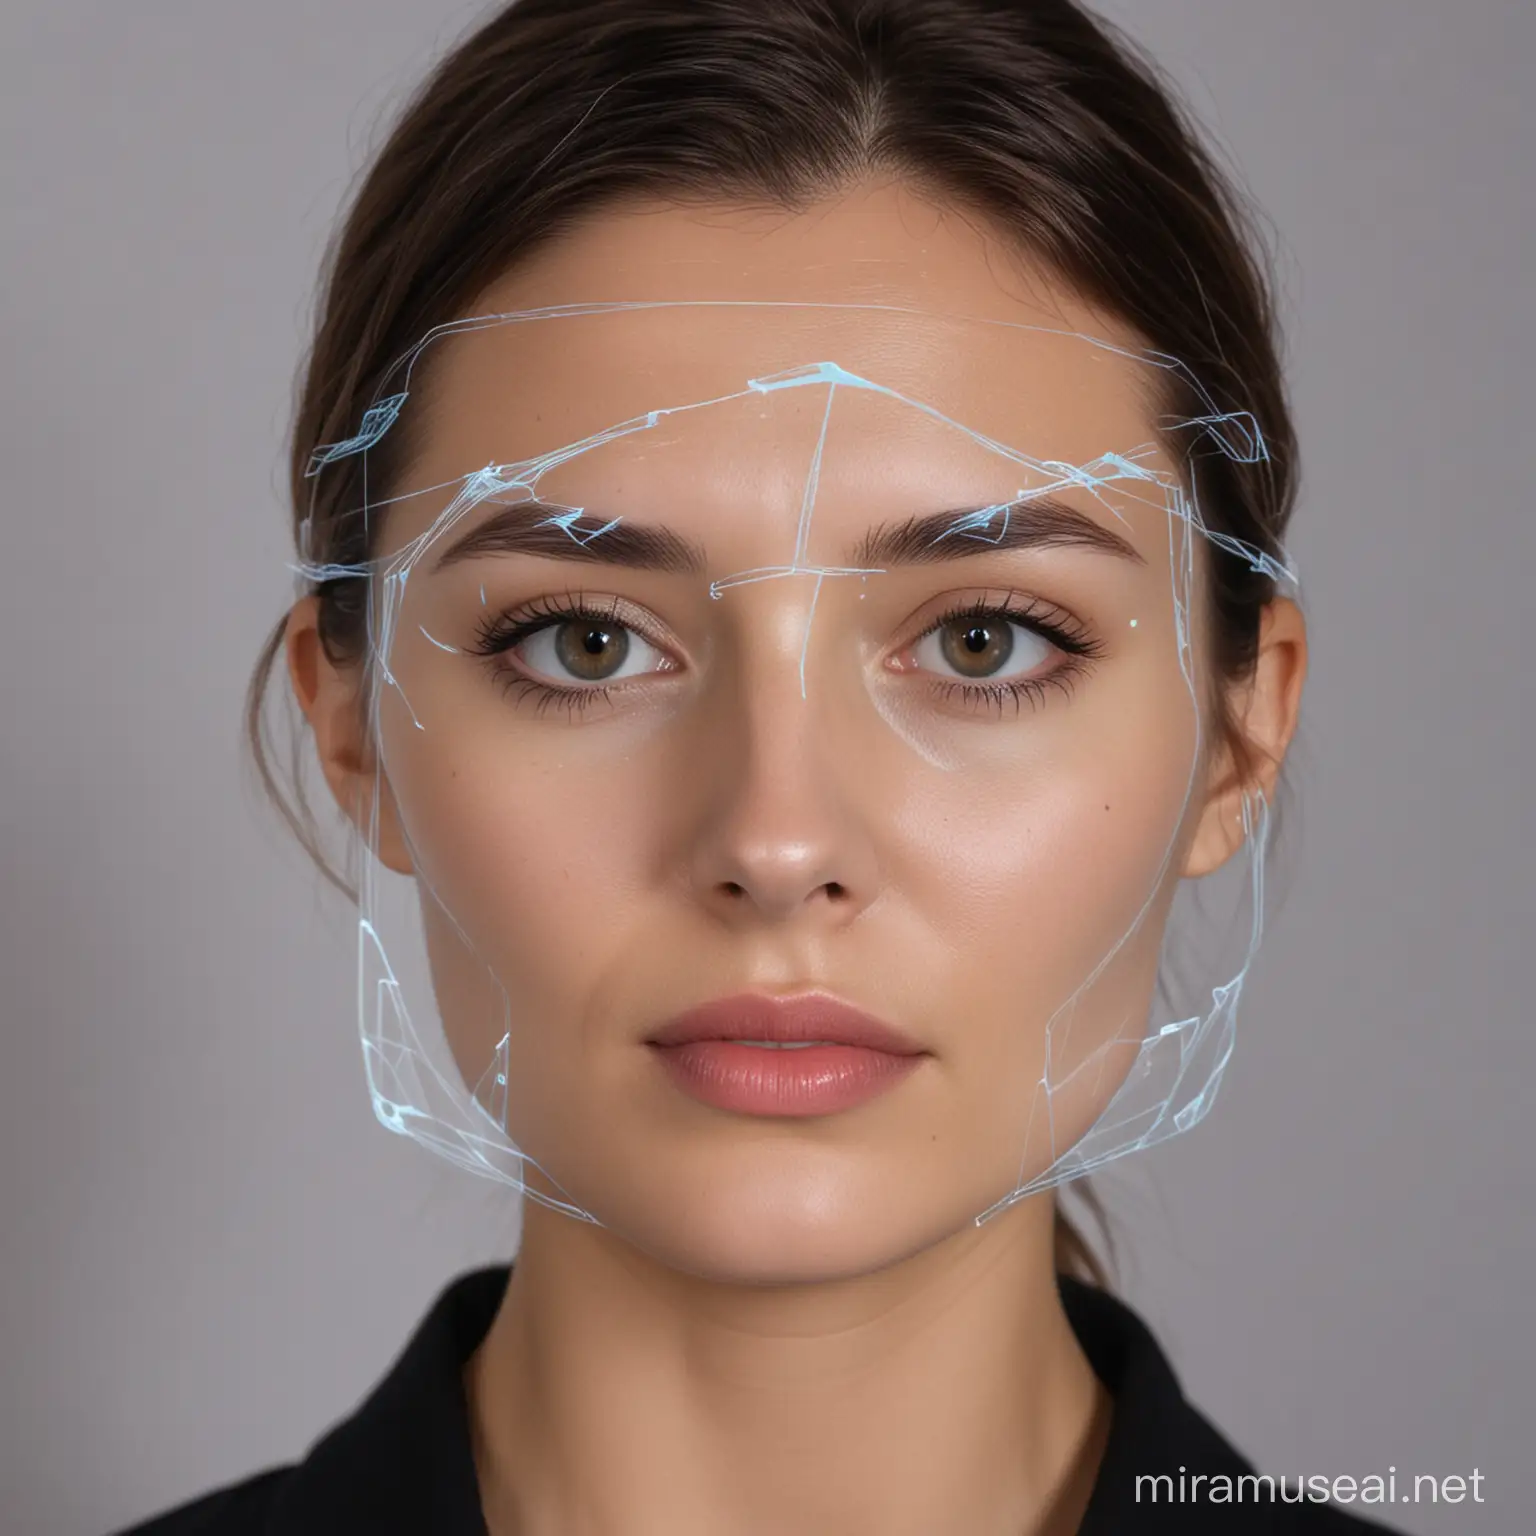 Augmented Reality Faces in Social Settings